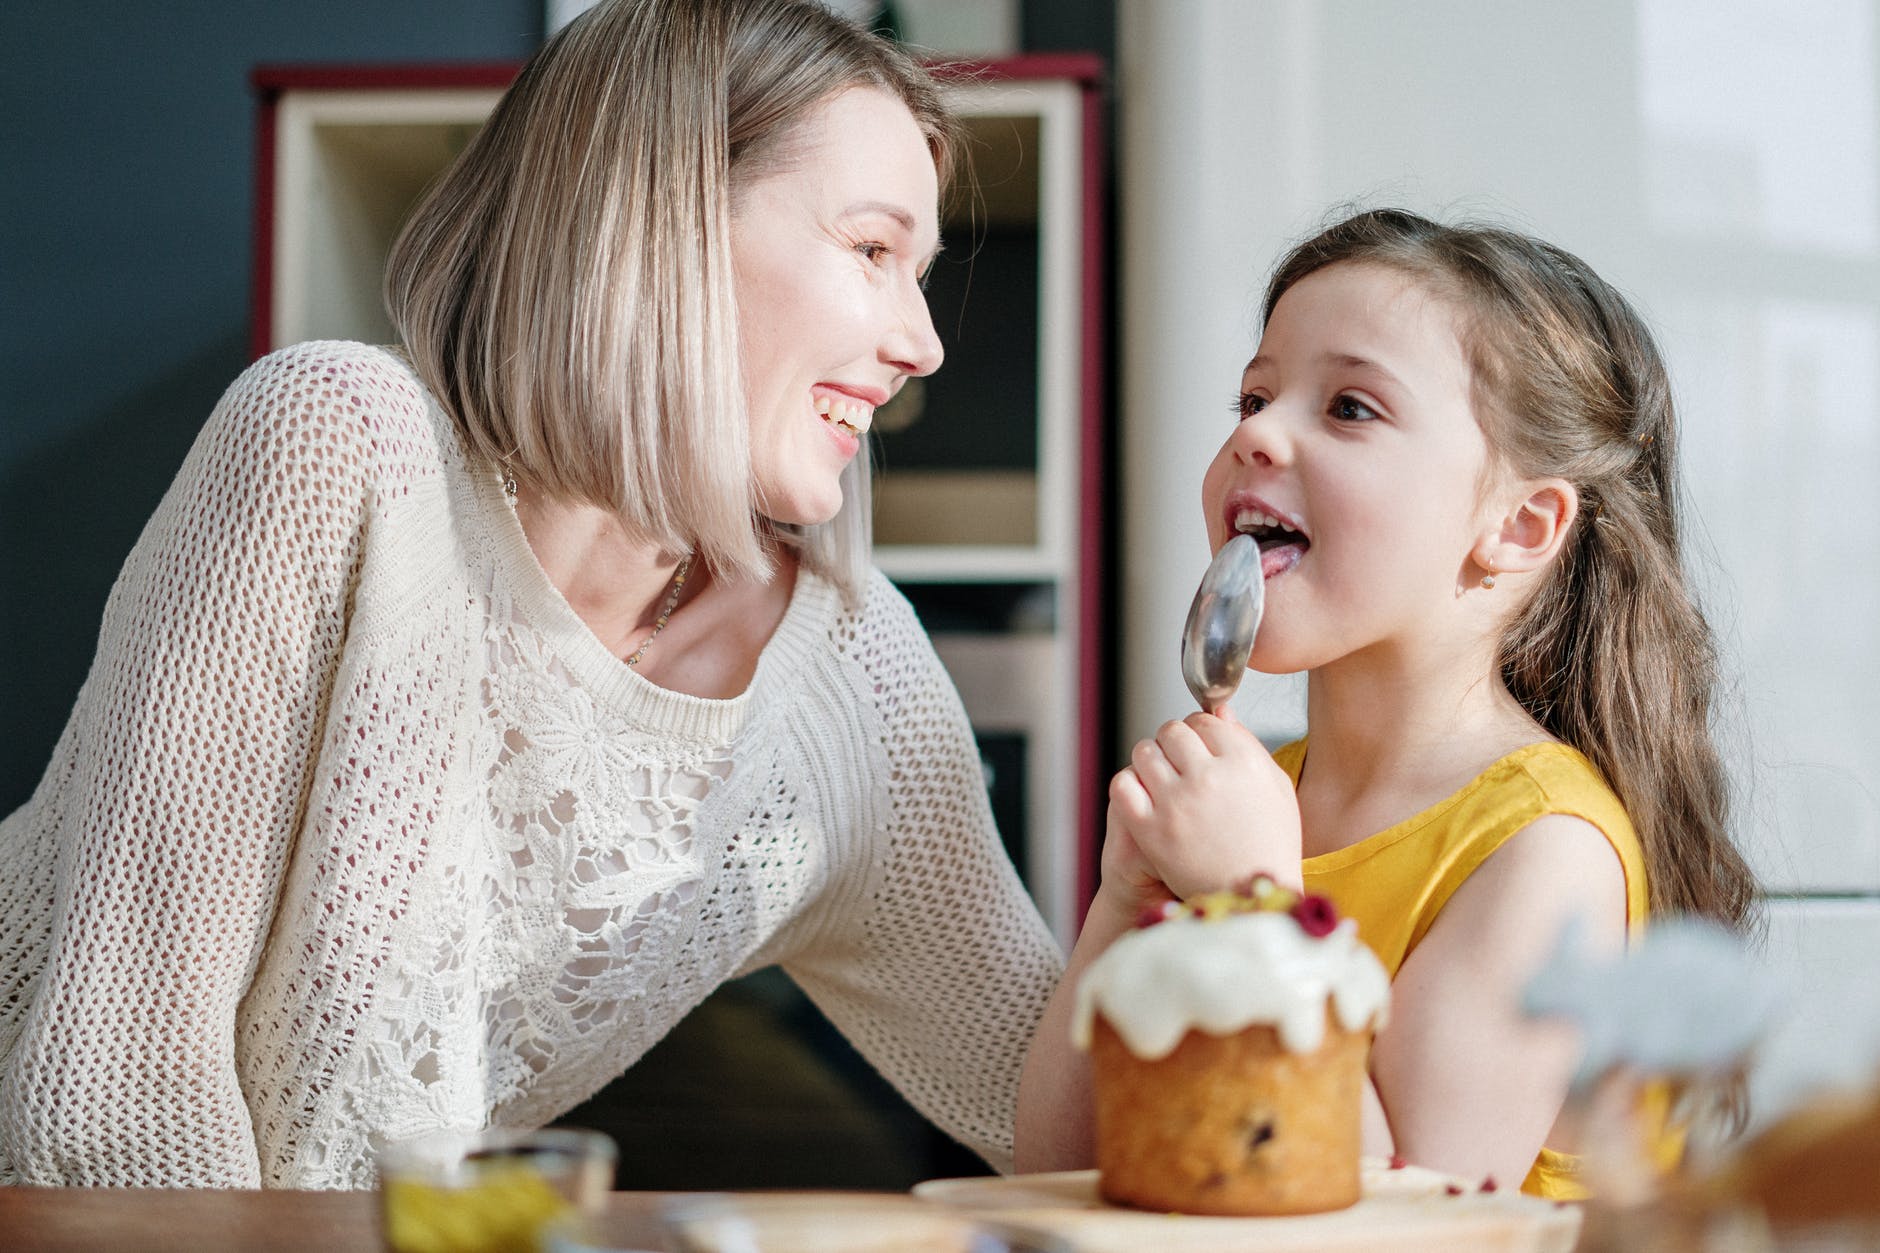 Mum laughing as daughter licks a spoon after baking a cake